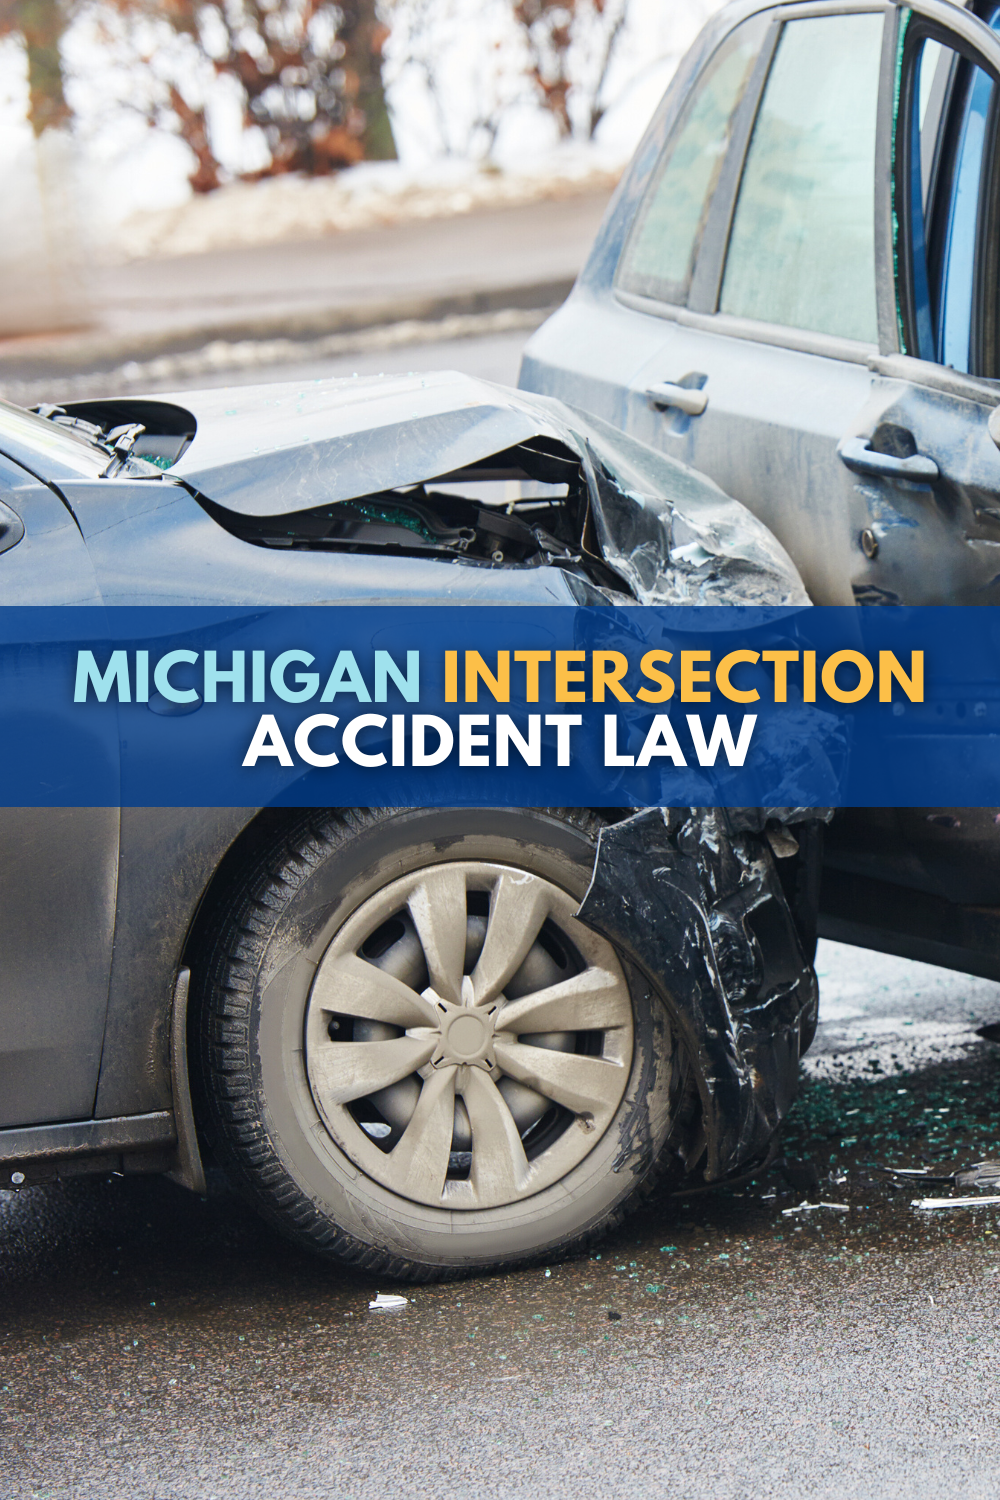 Michigan Intersection Accident Law: What You Need To Know